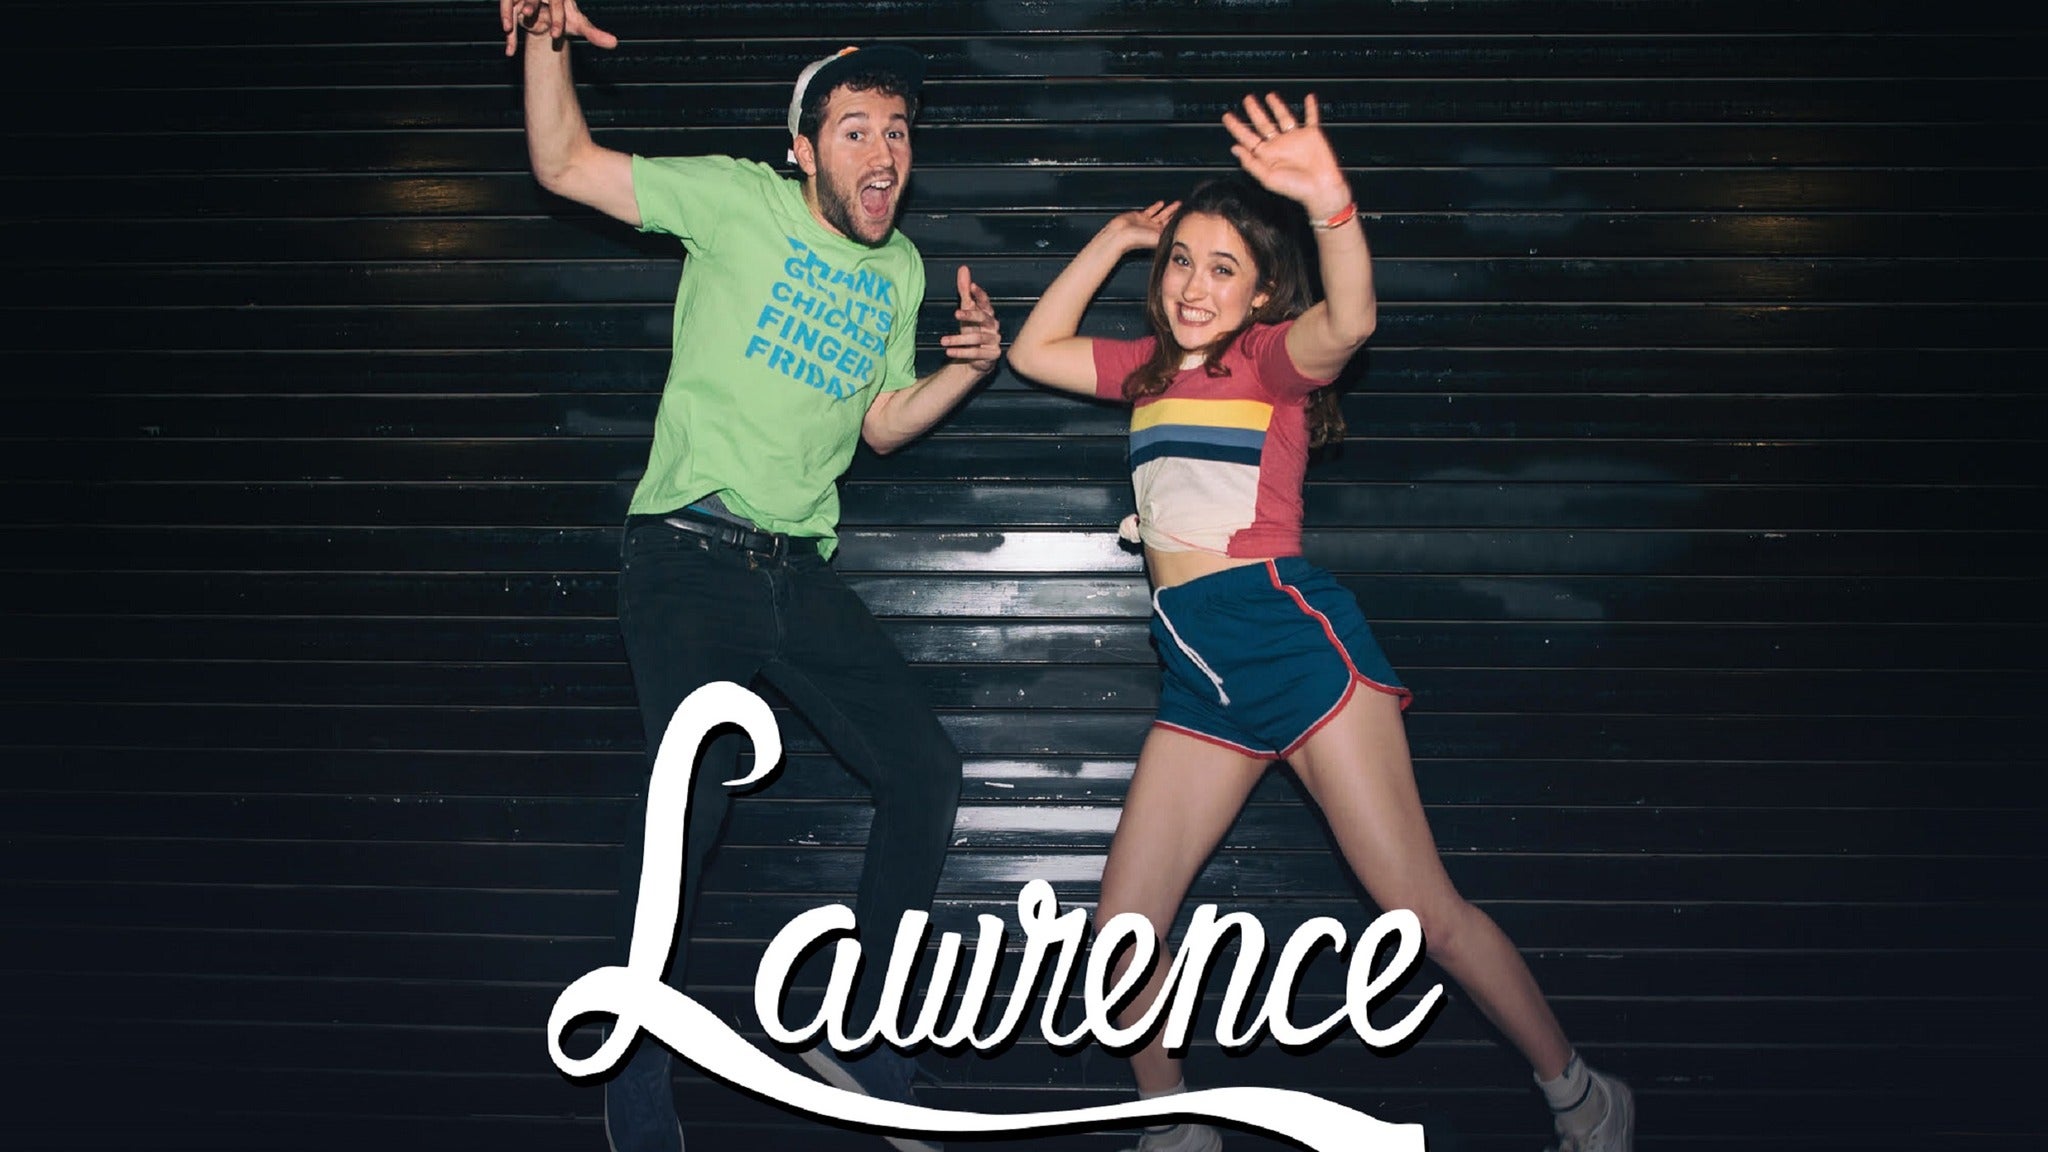 Lawrence in New York promo photo for AMEX presale offer code